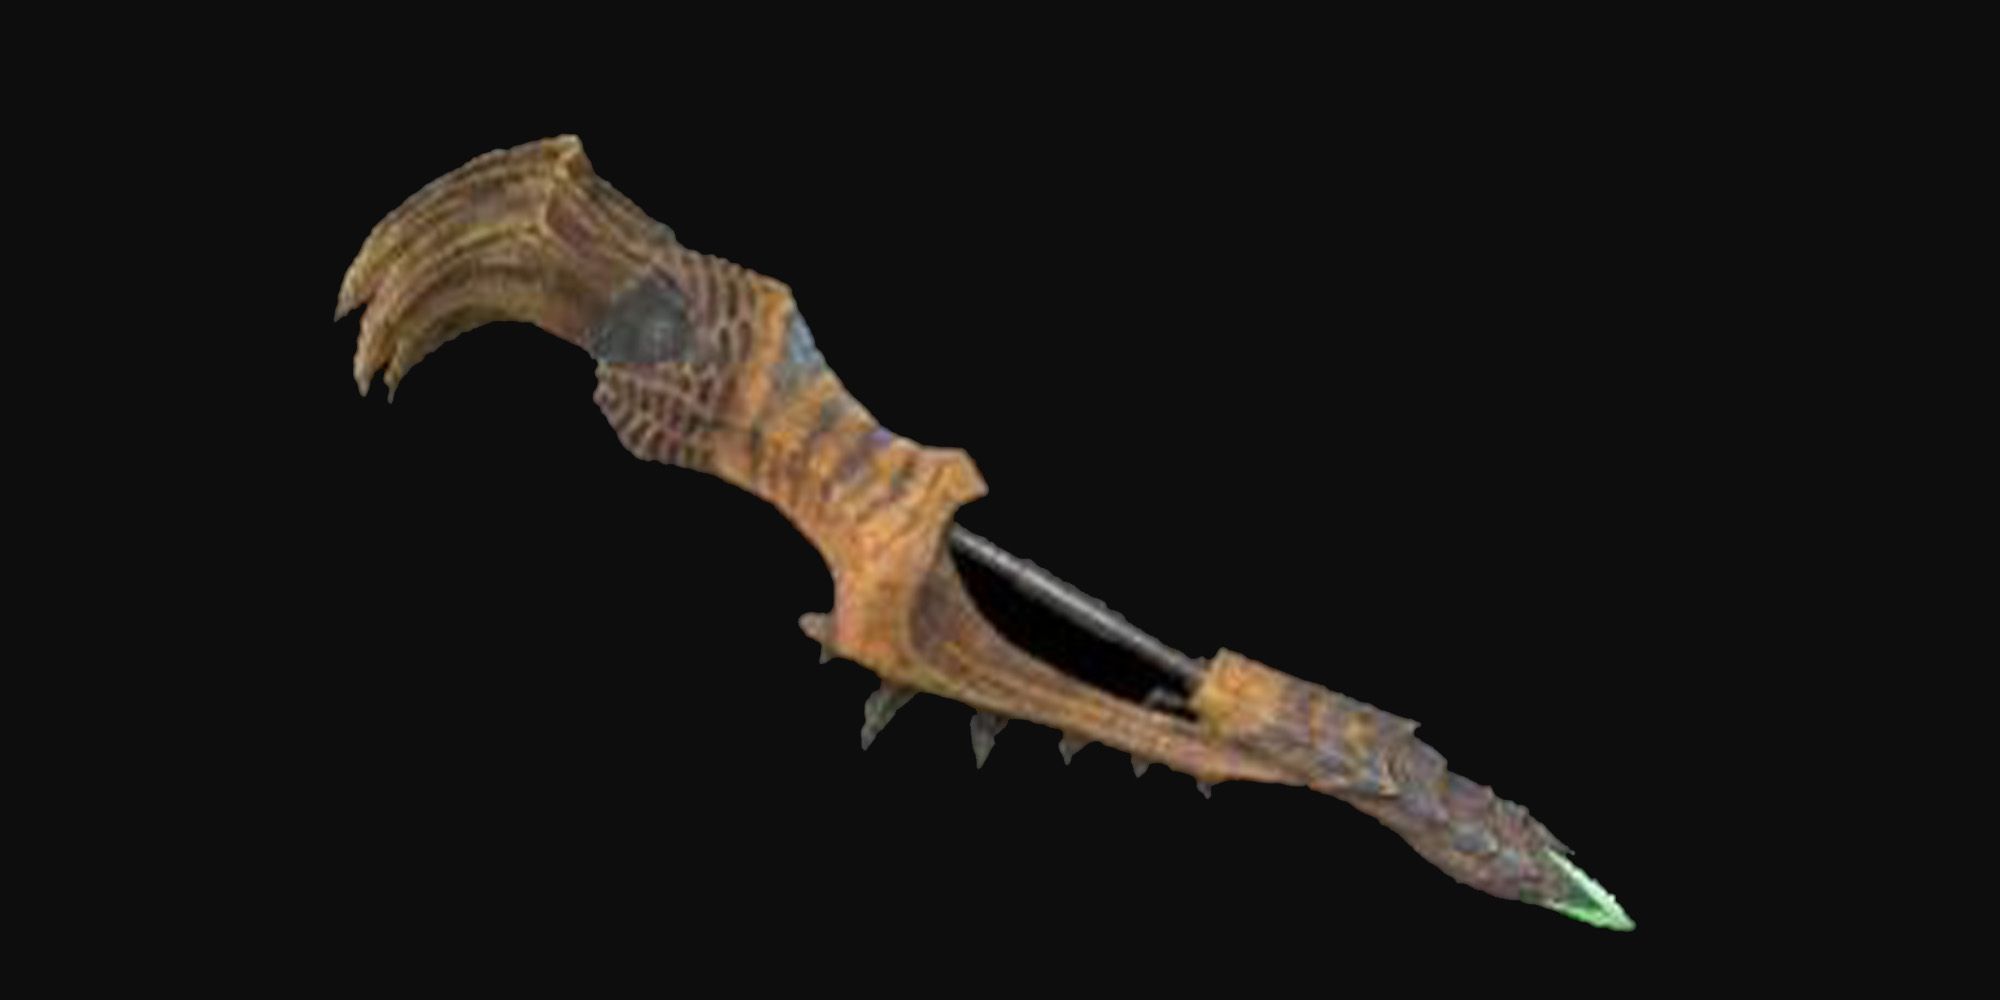 Tigerclaw Glaive an Insect Glaive from Monster Hunter Rise